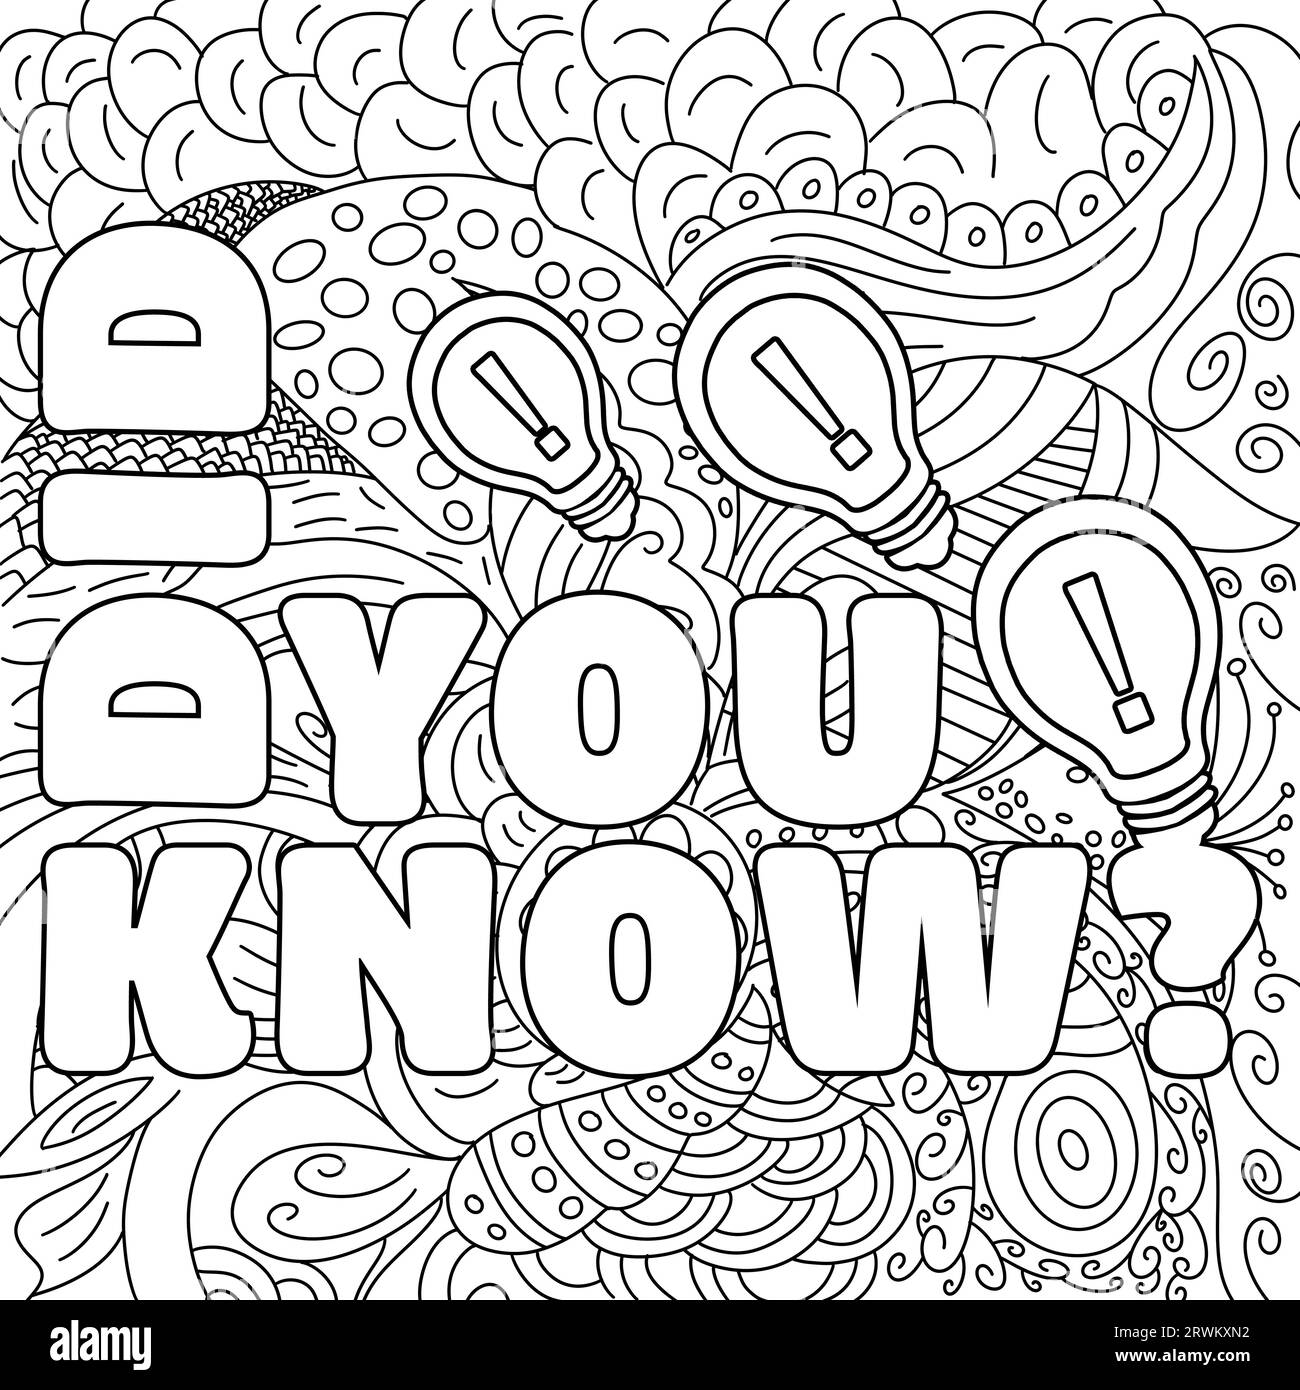 Did You Know Doodle Texture Background Black White Stock Photo